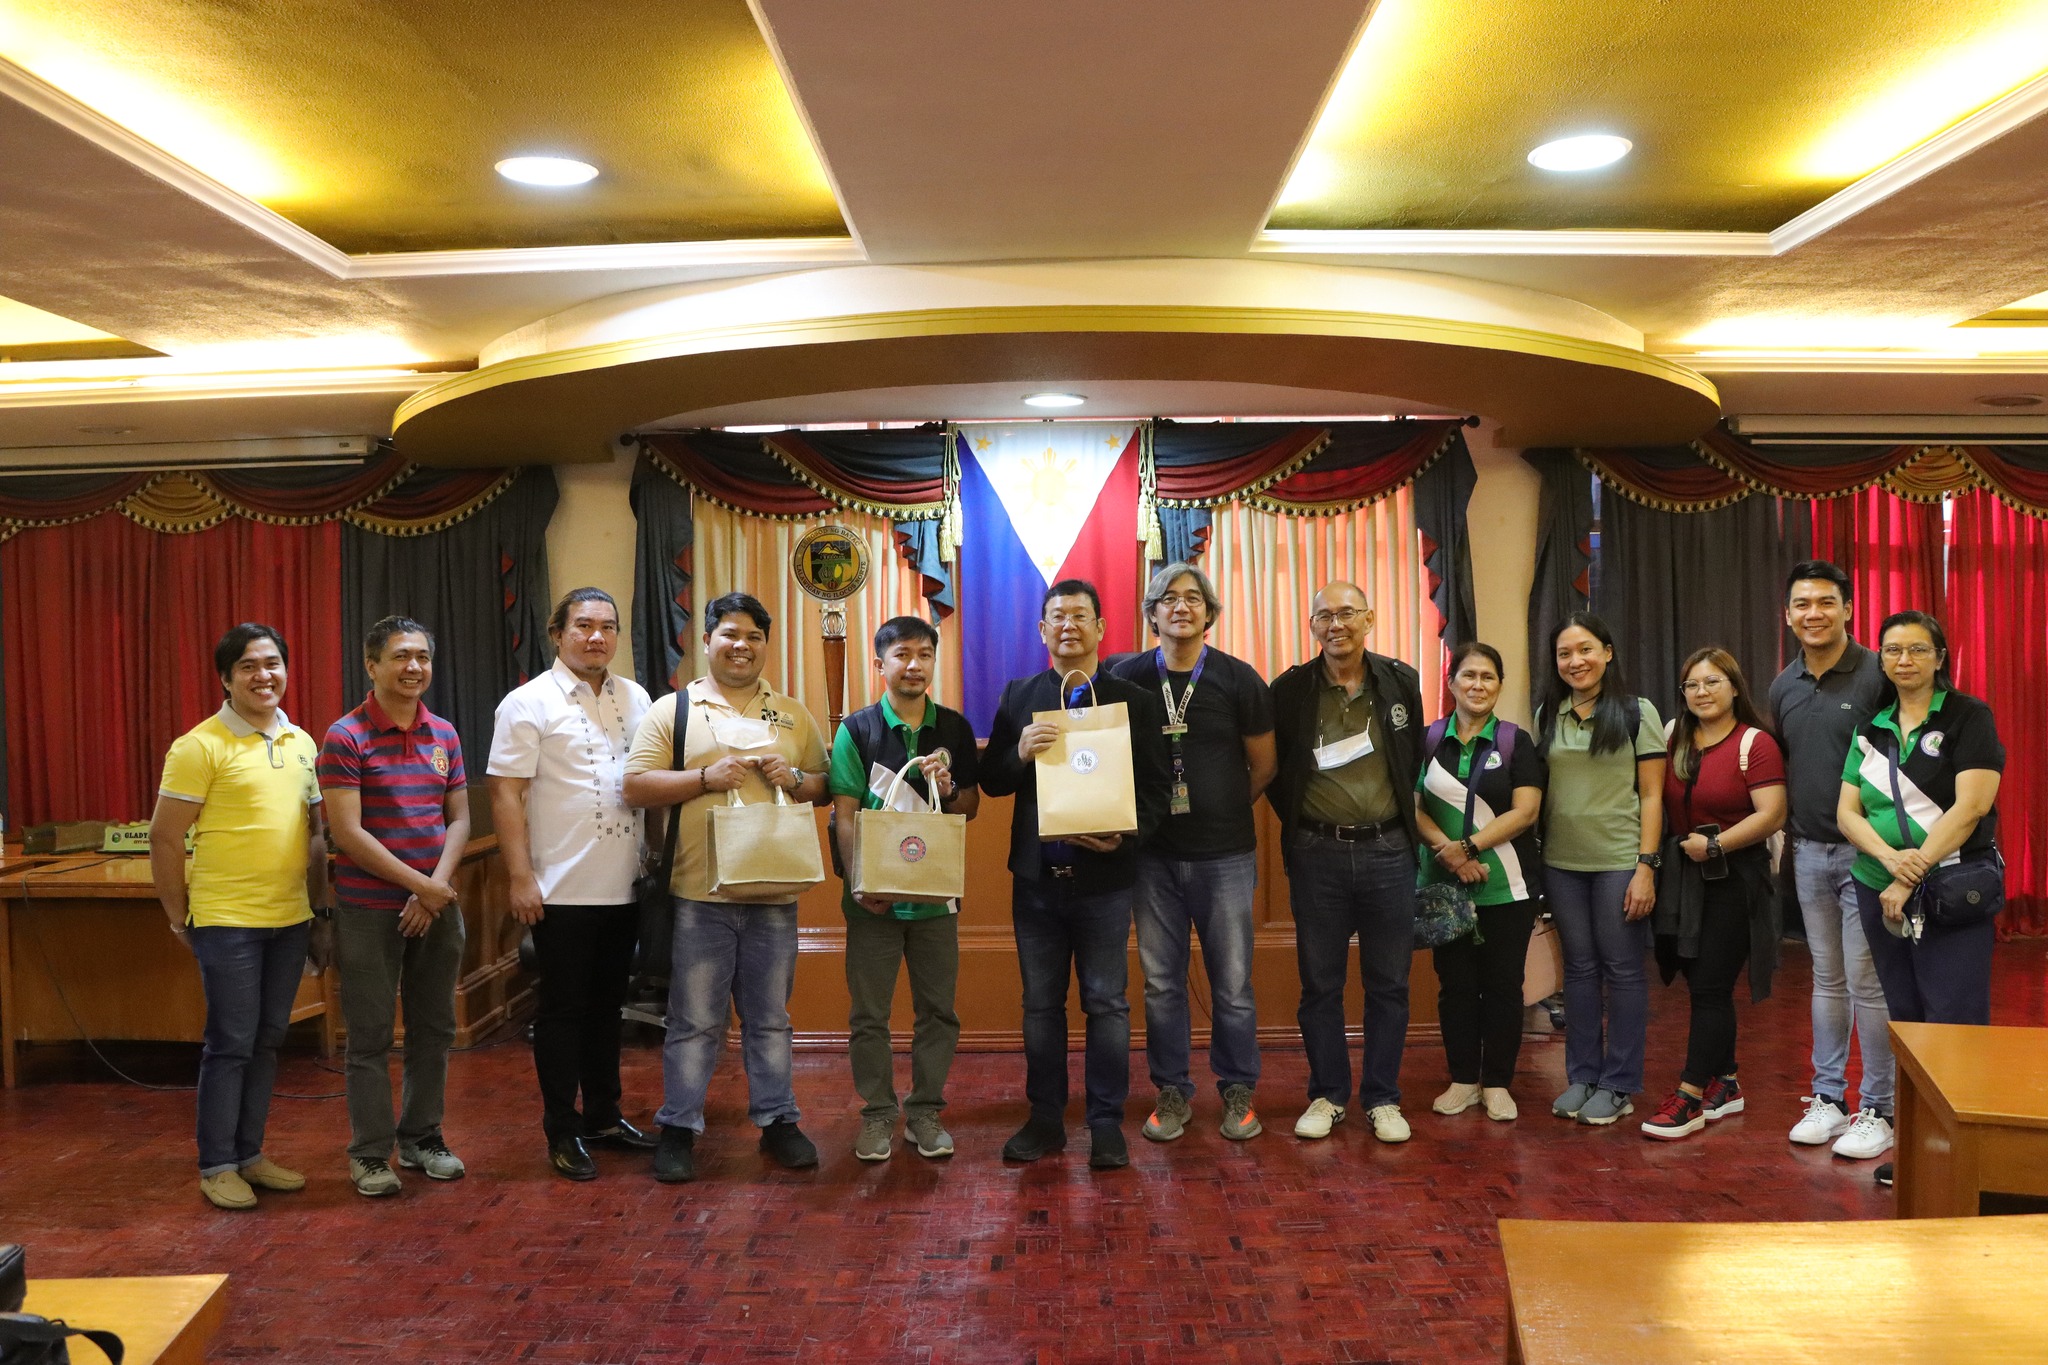 PHILIPPINE METEOROLOGICAL SOCIETY CONDUCTS IEC ON UNDERSTANDING HYDROMETEOROLOGICAL HAZARDS